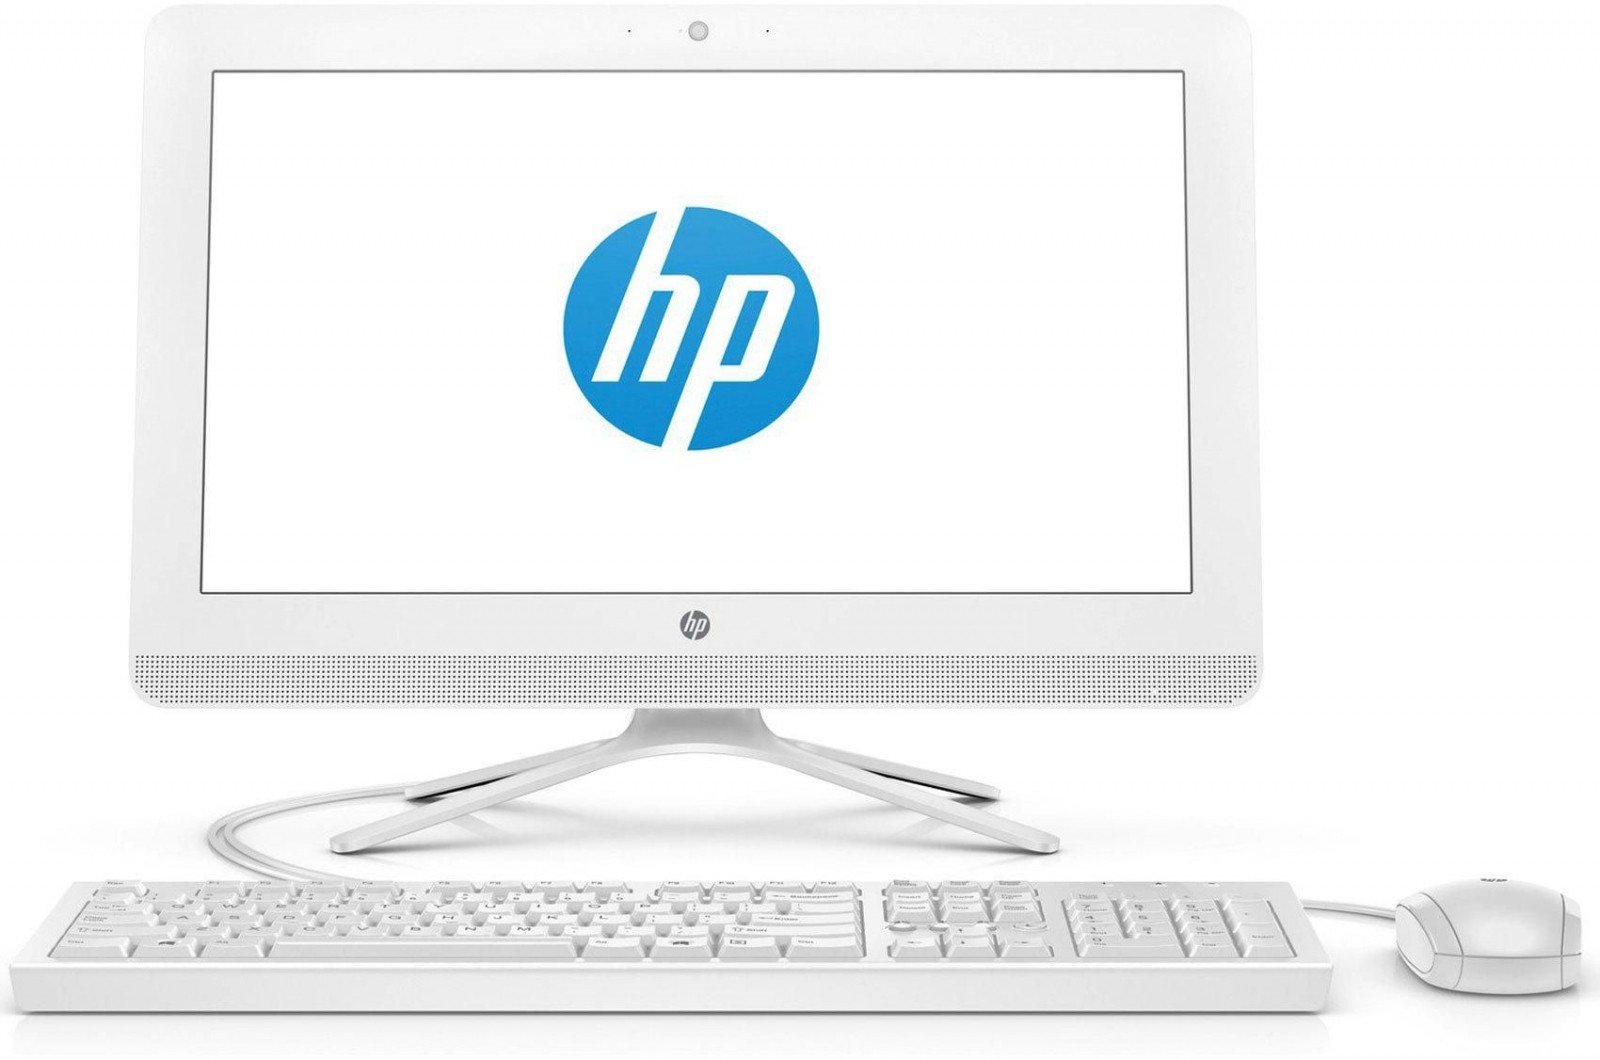 HP ALL IN ONE PC